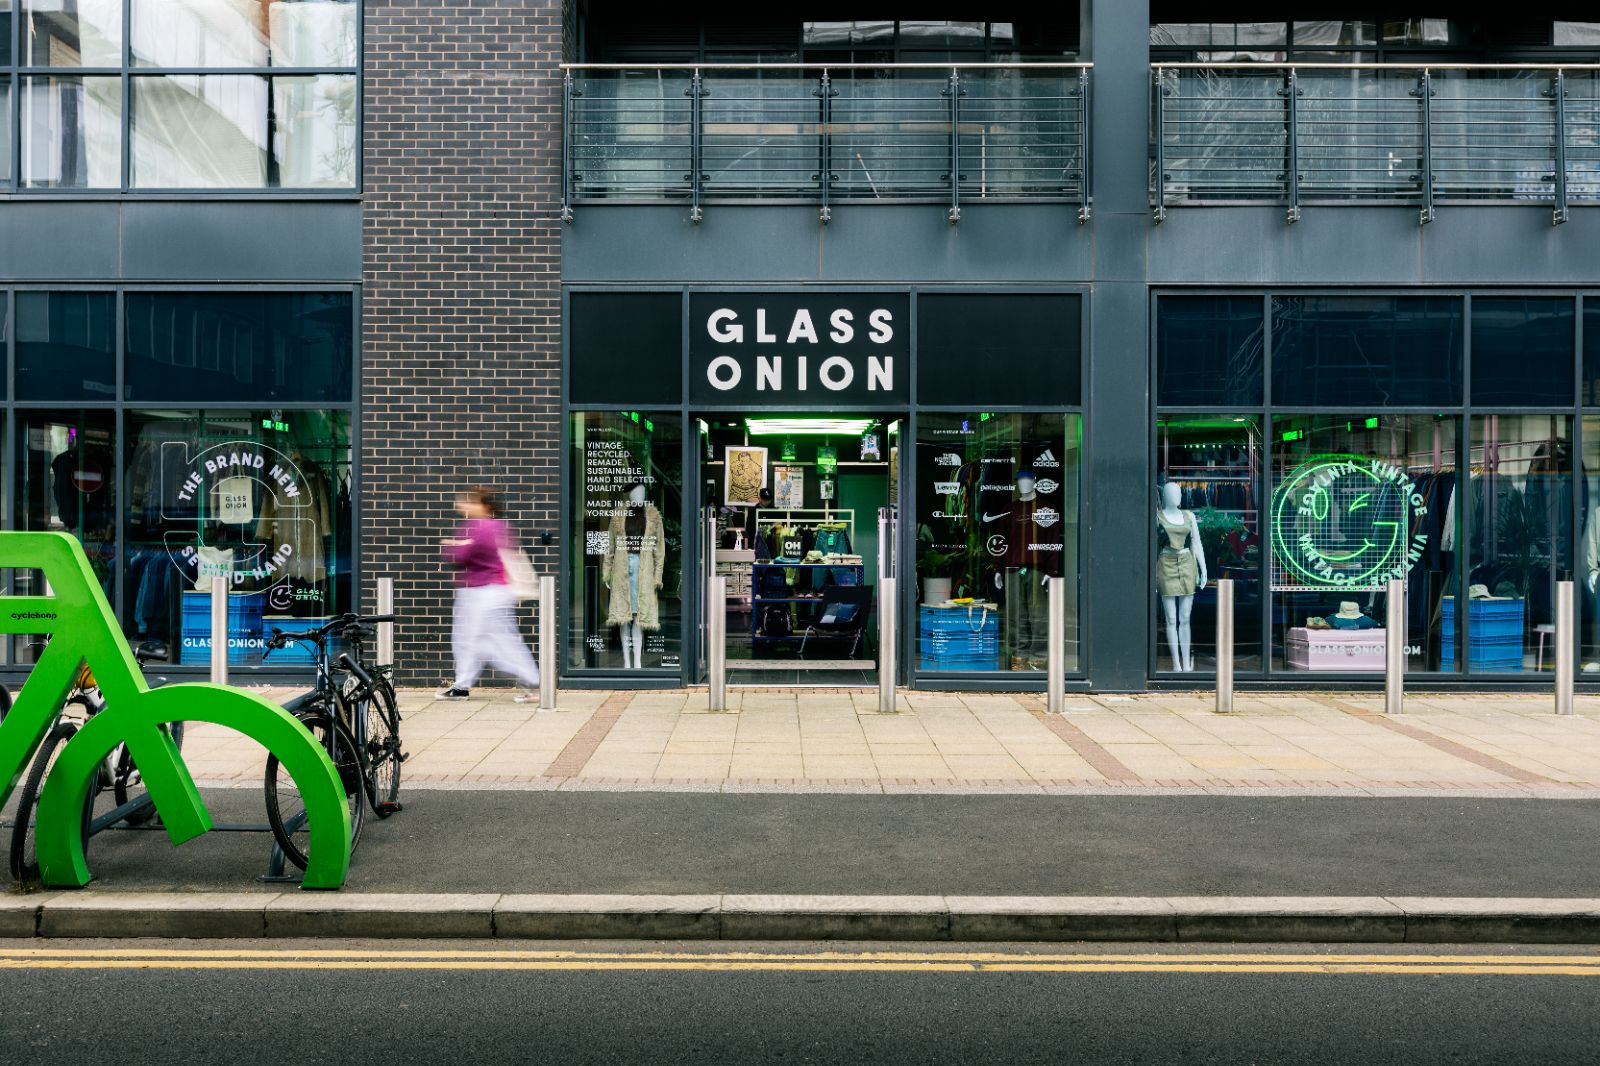 Outside of Glass Onion’s clothing store with a green winking smiley face light in window. Green bike rack in foreground